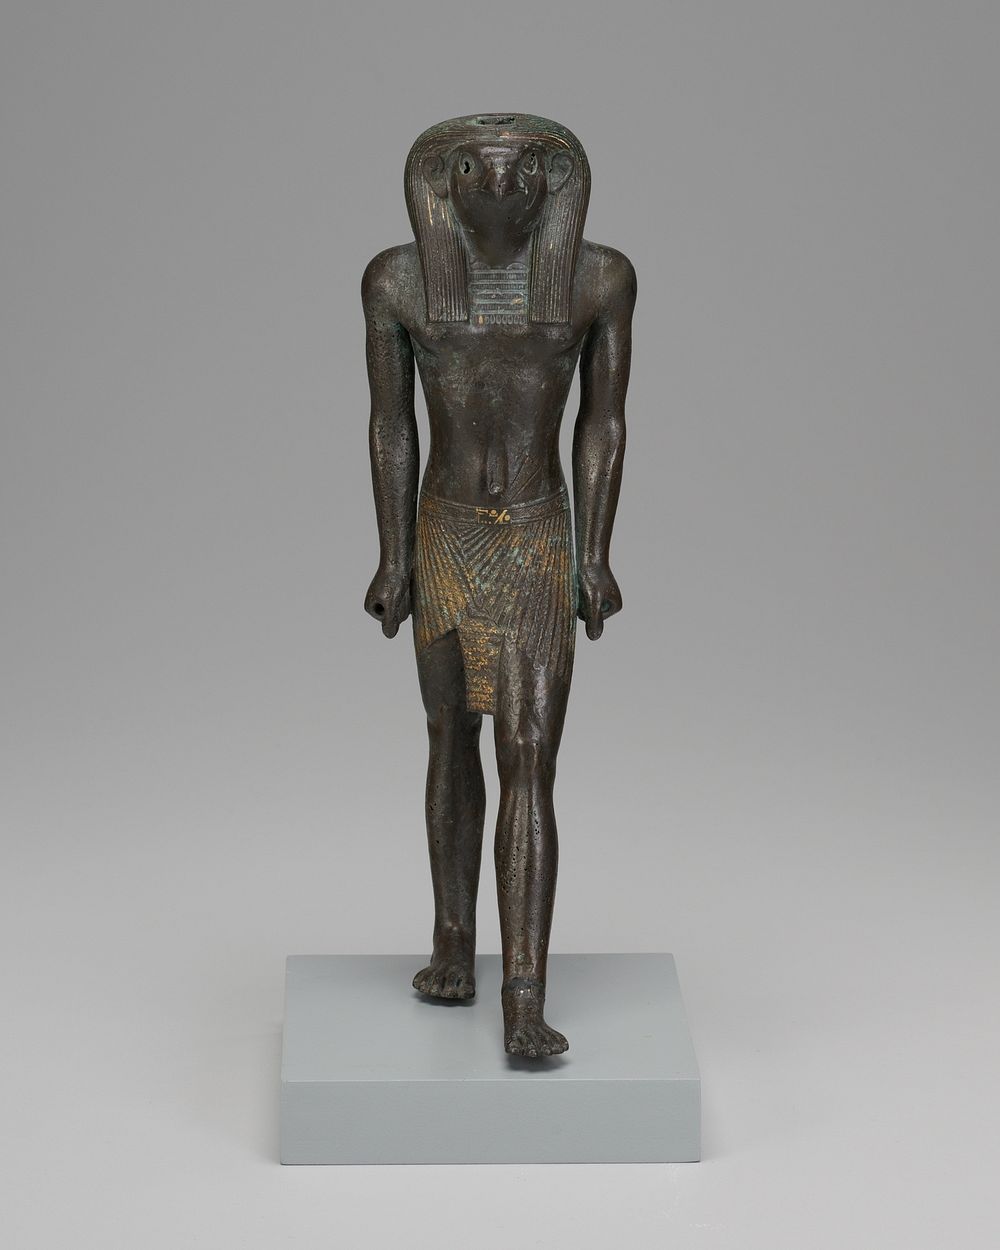 Statuette of Re-Horakhty by Ancient Egyptian